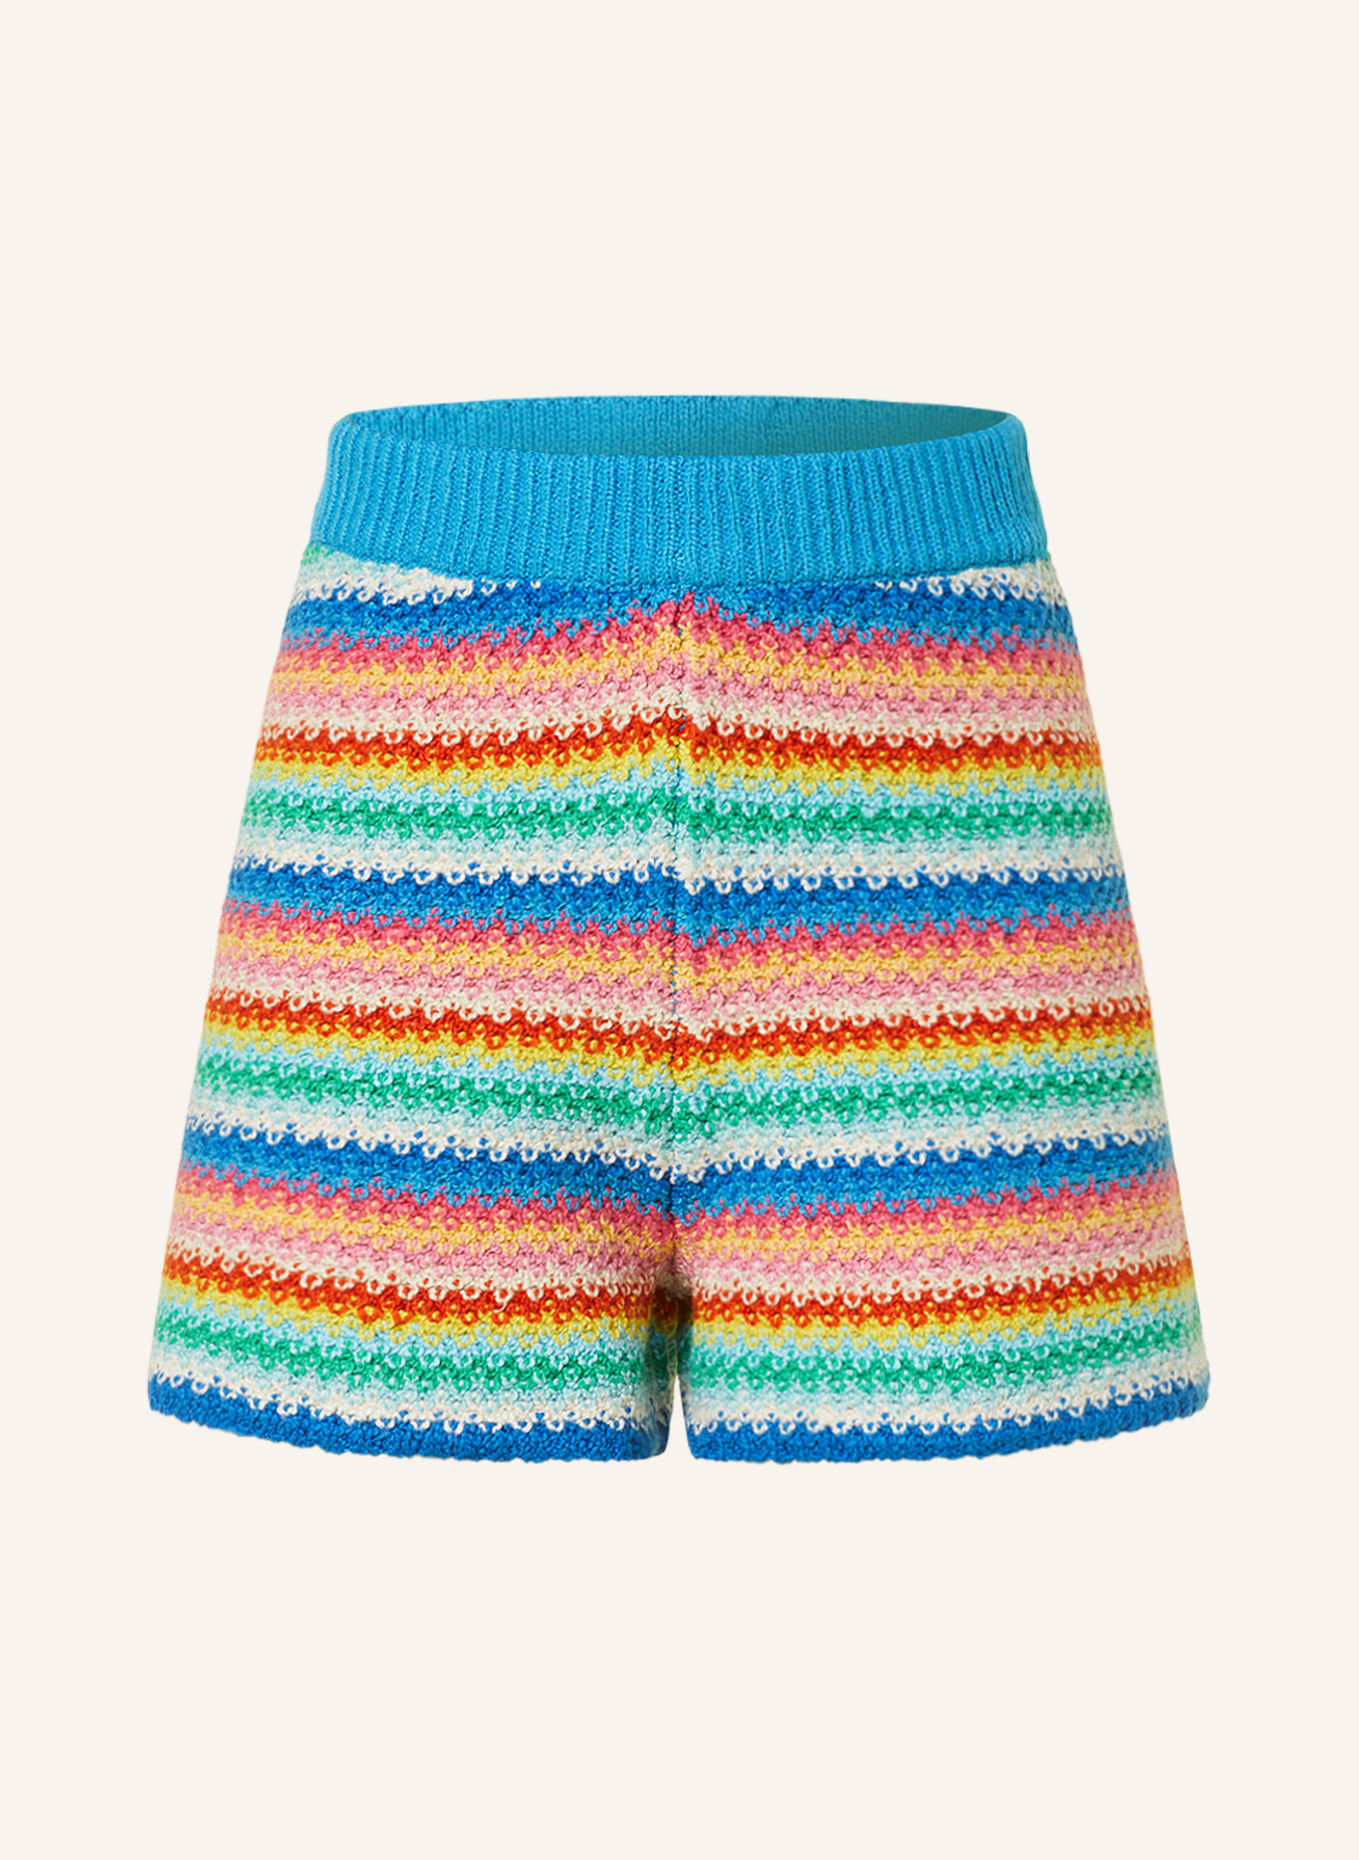 ALANUi Knit shorts OVER THE RAINBOW, Color: NEON BLUE/ PINK/ YELLOW (Image 1)